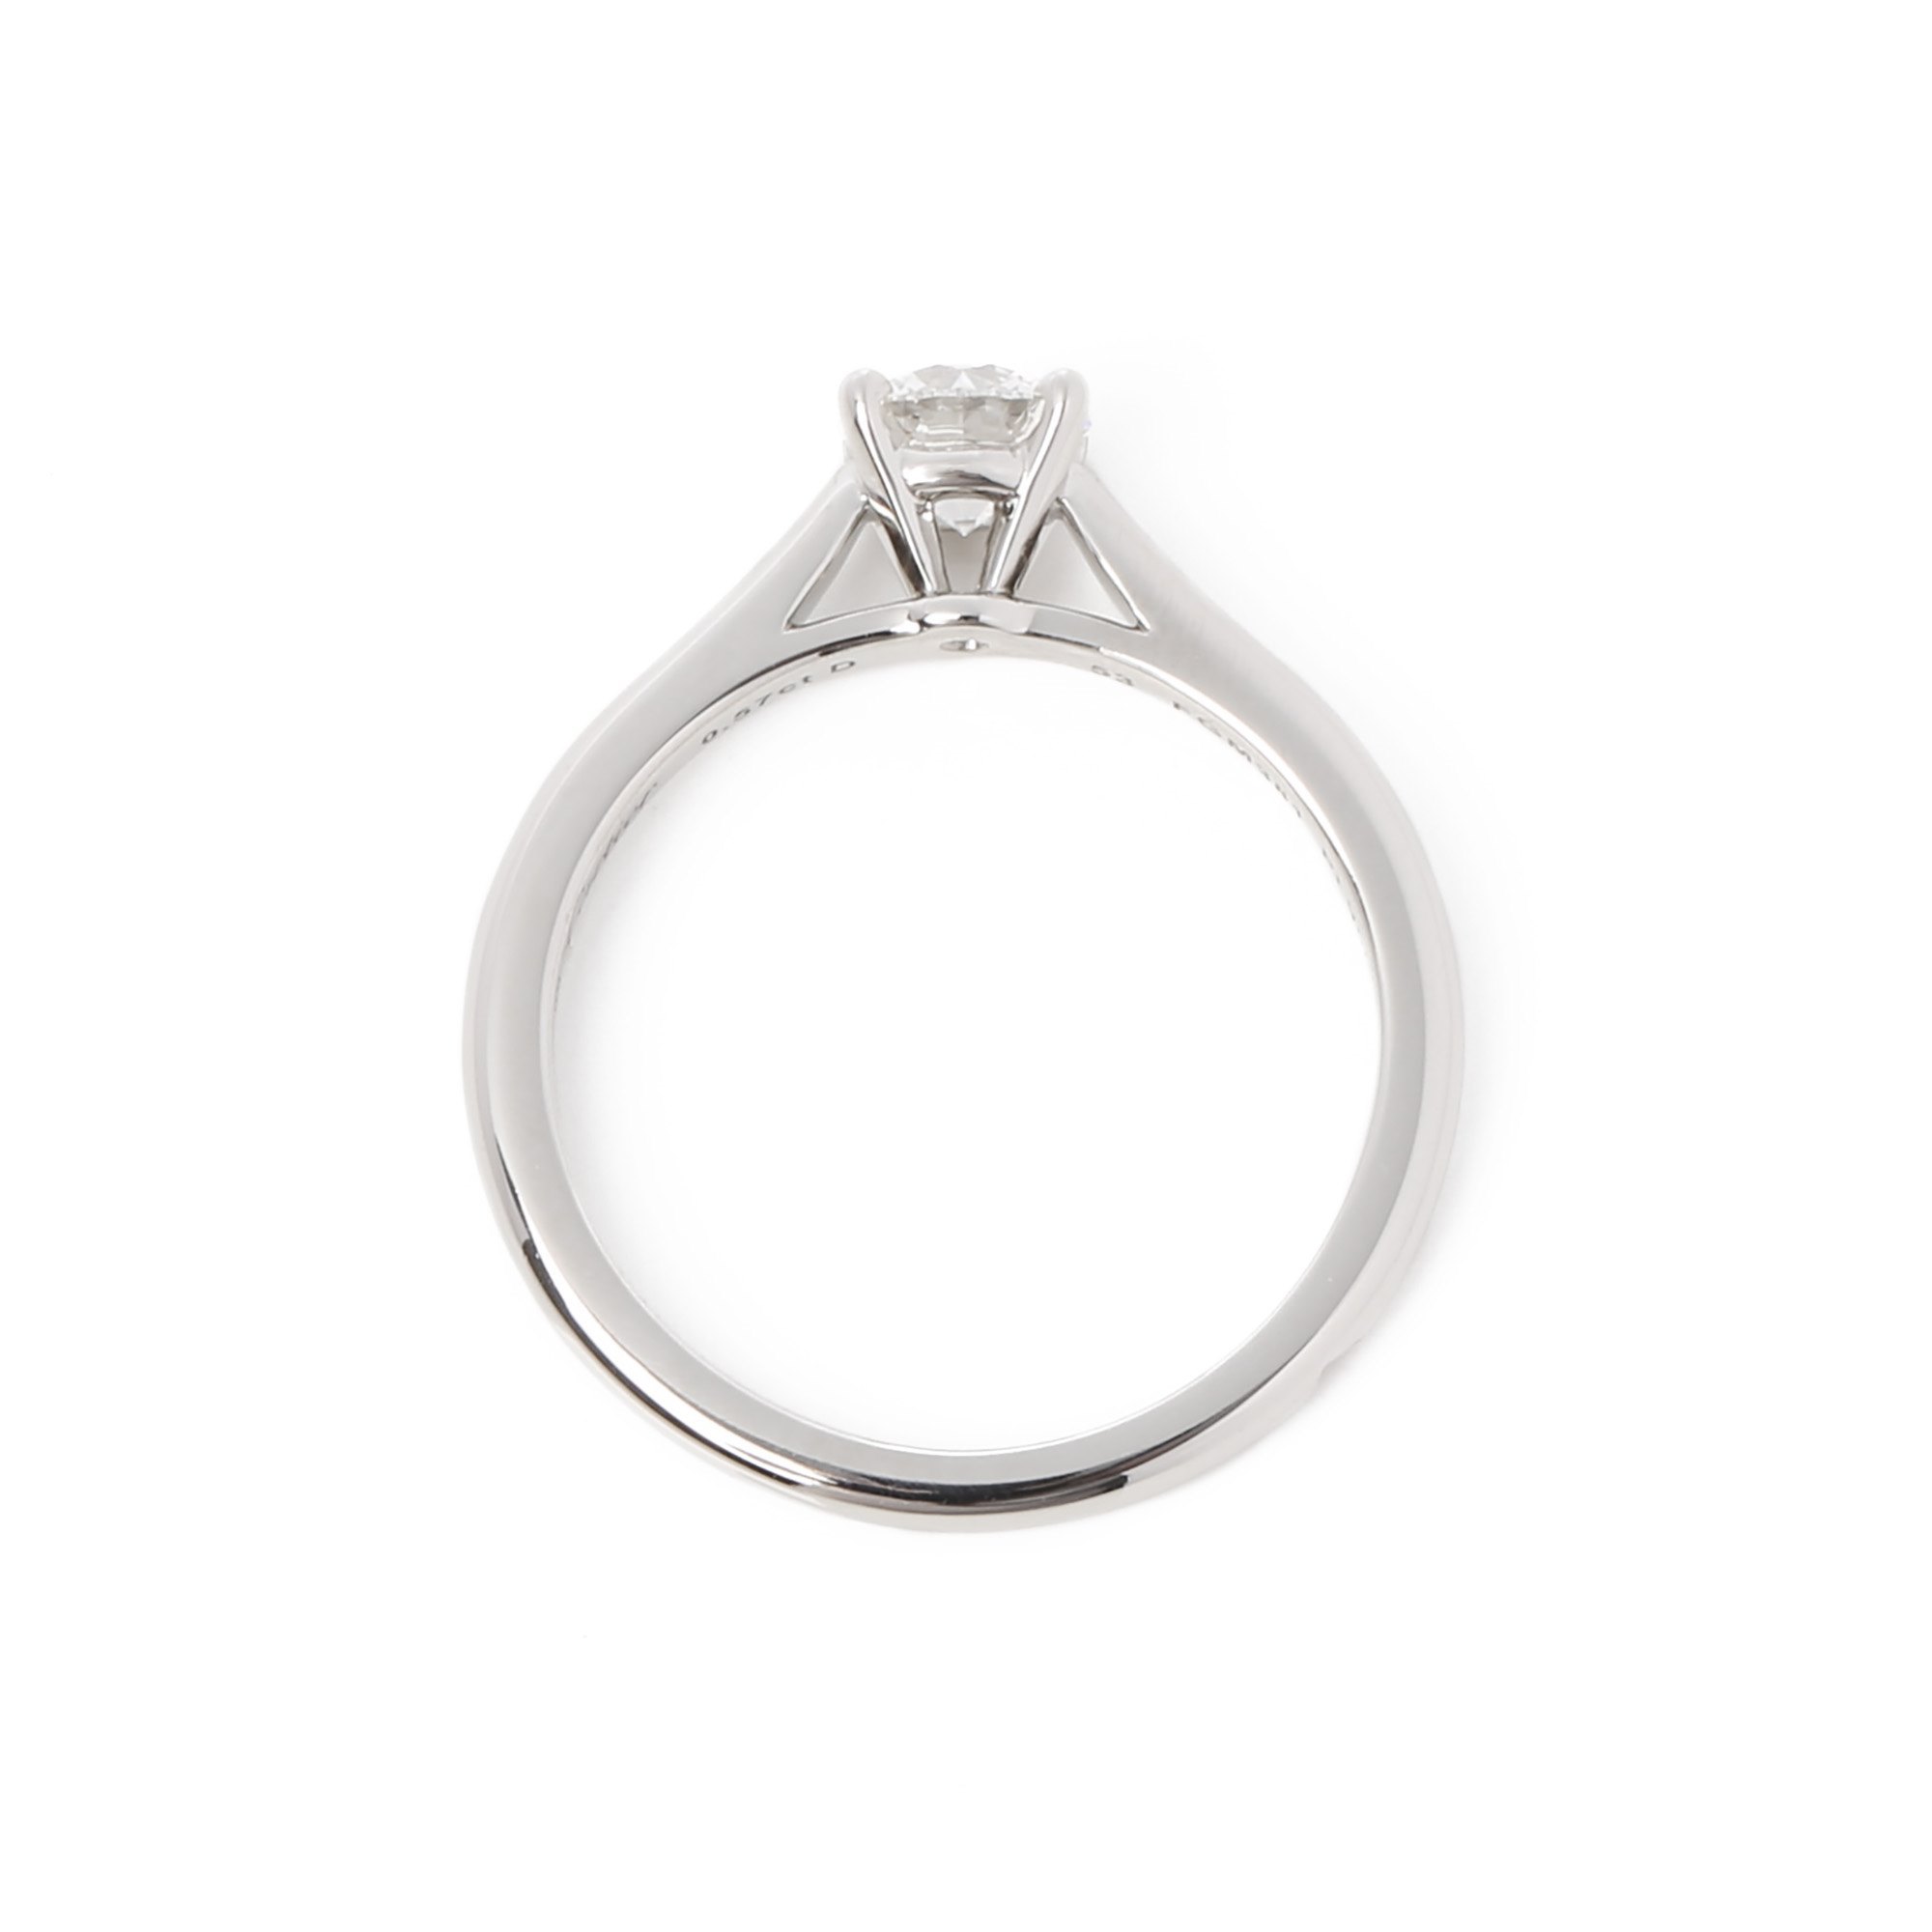 Cartier 0.57ct Diamond Solitaire 1895 ring